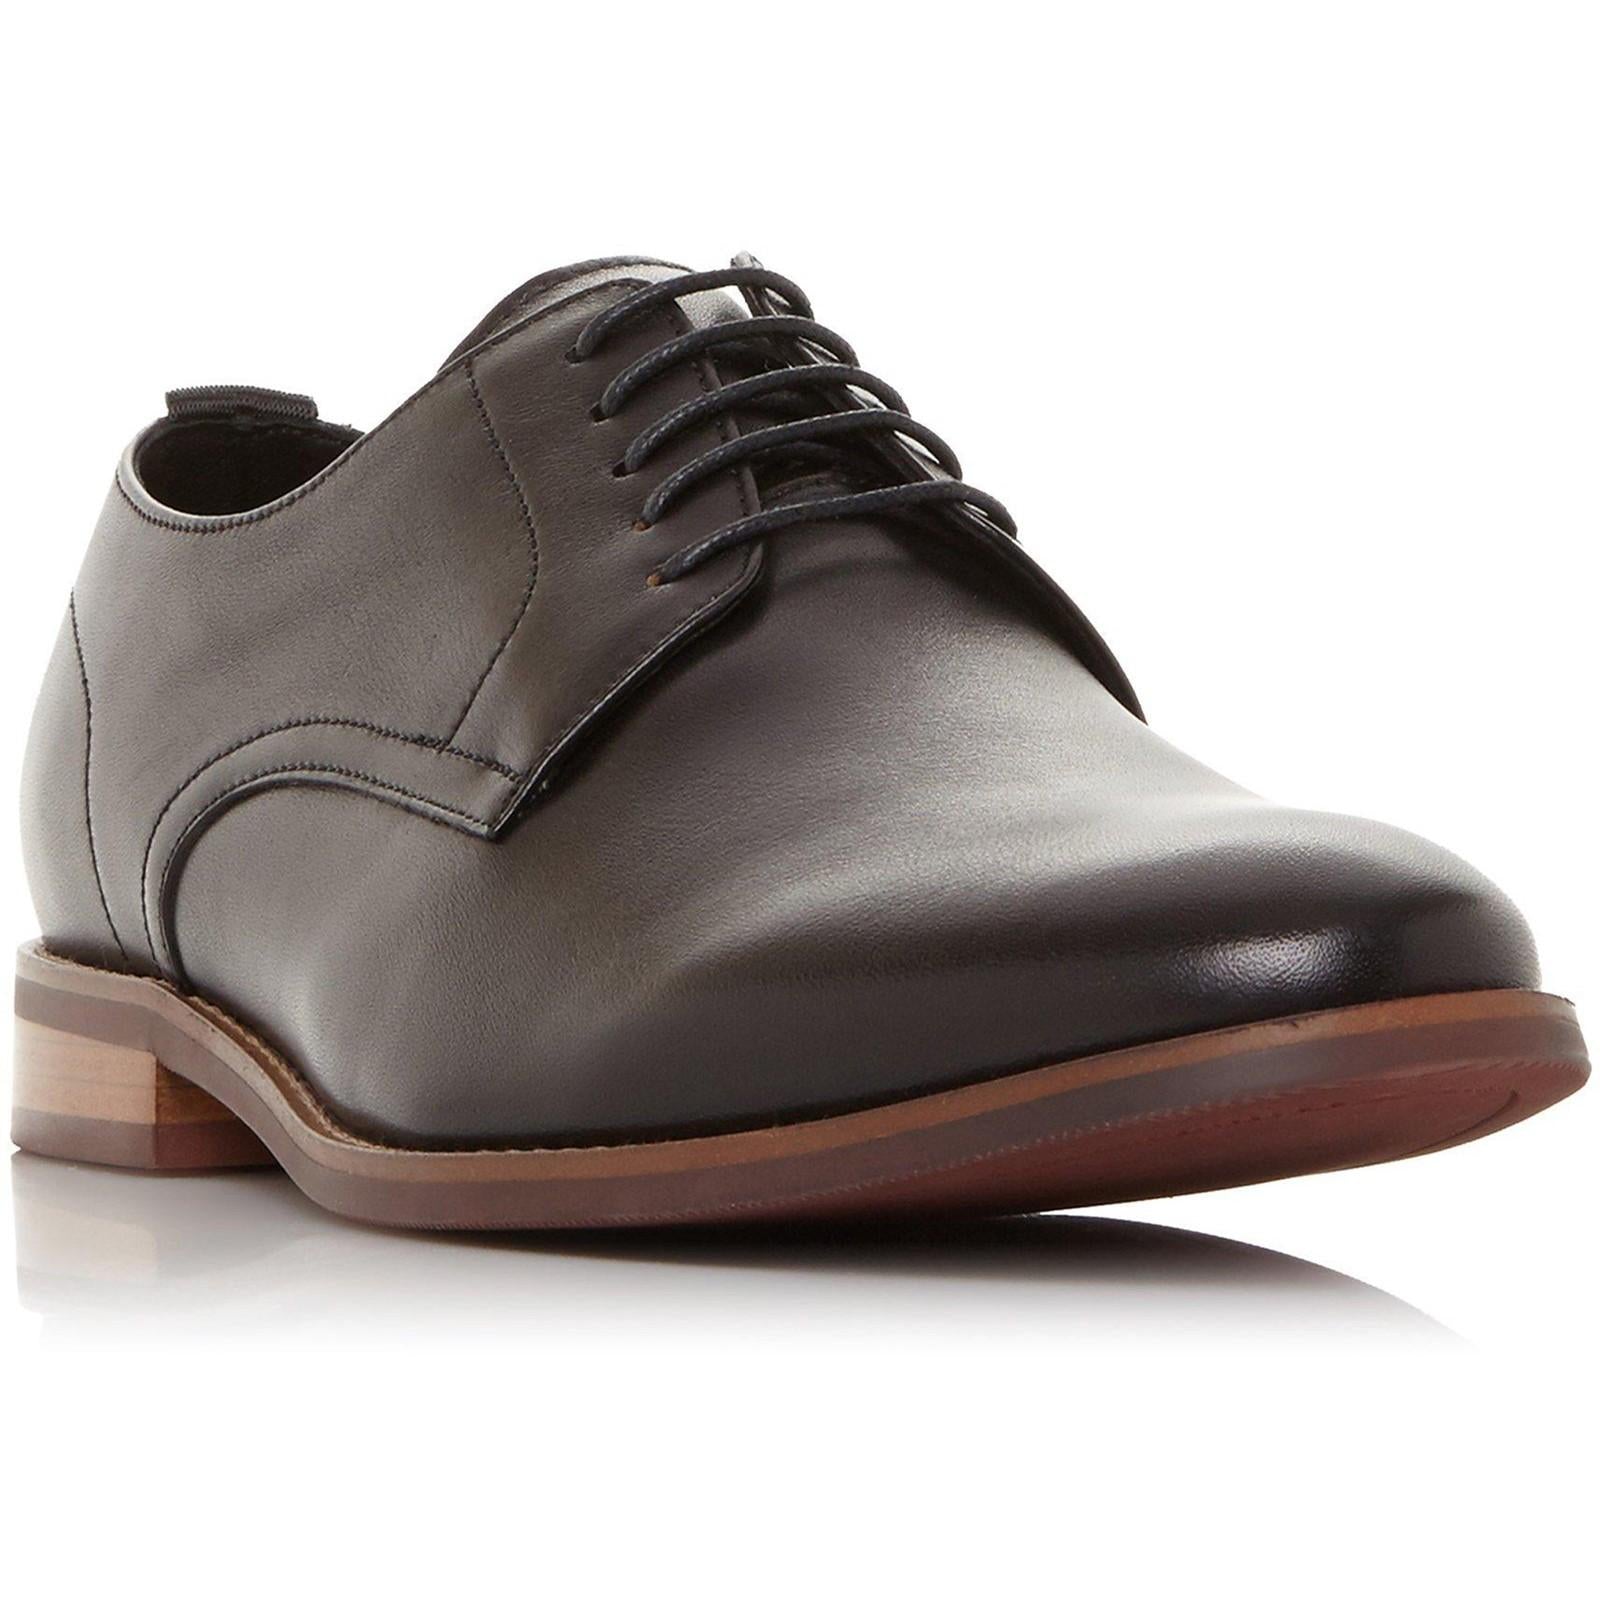 Dune London Suffolks Leather Smart Gibson Shoes